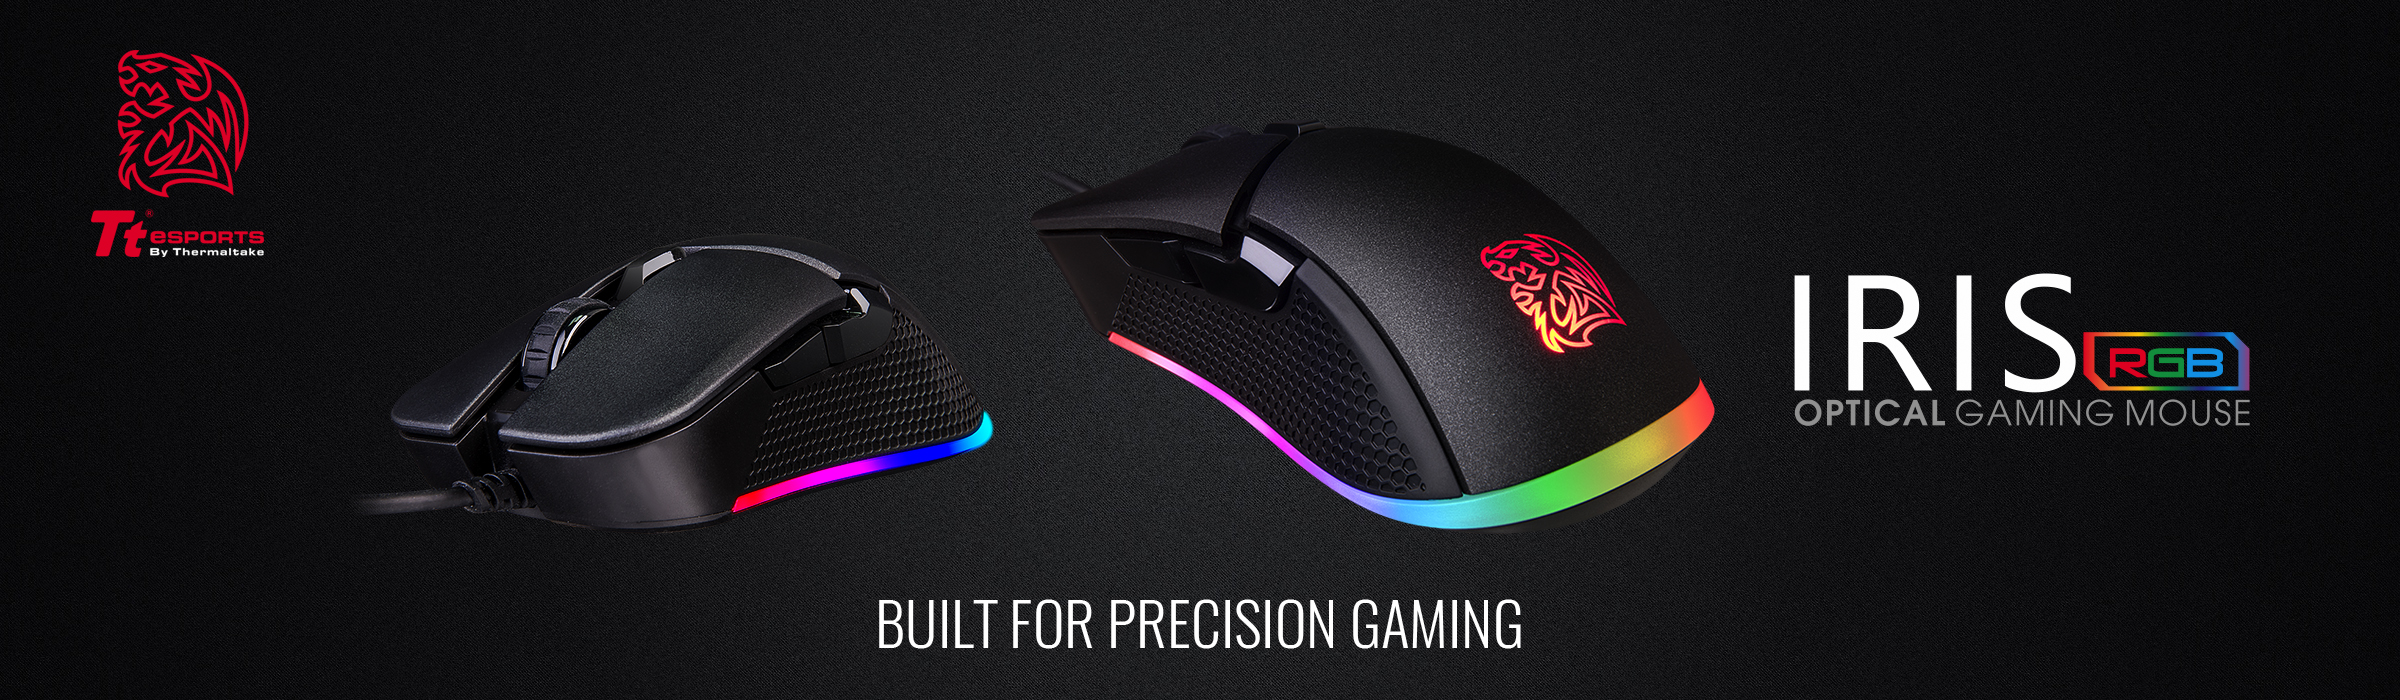 Tt eSPORTS Iris Optical RGB Gaming Mouse  Now Available Worldwide